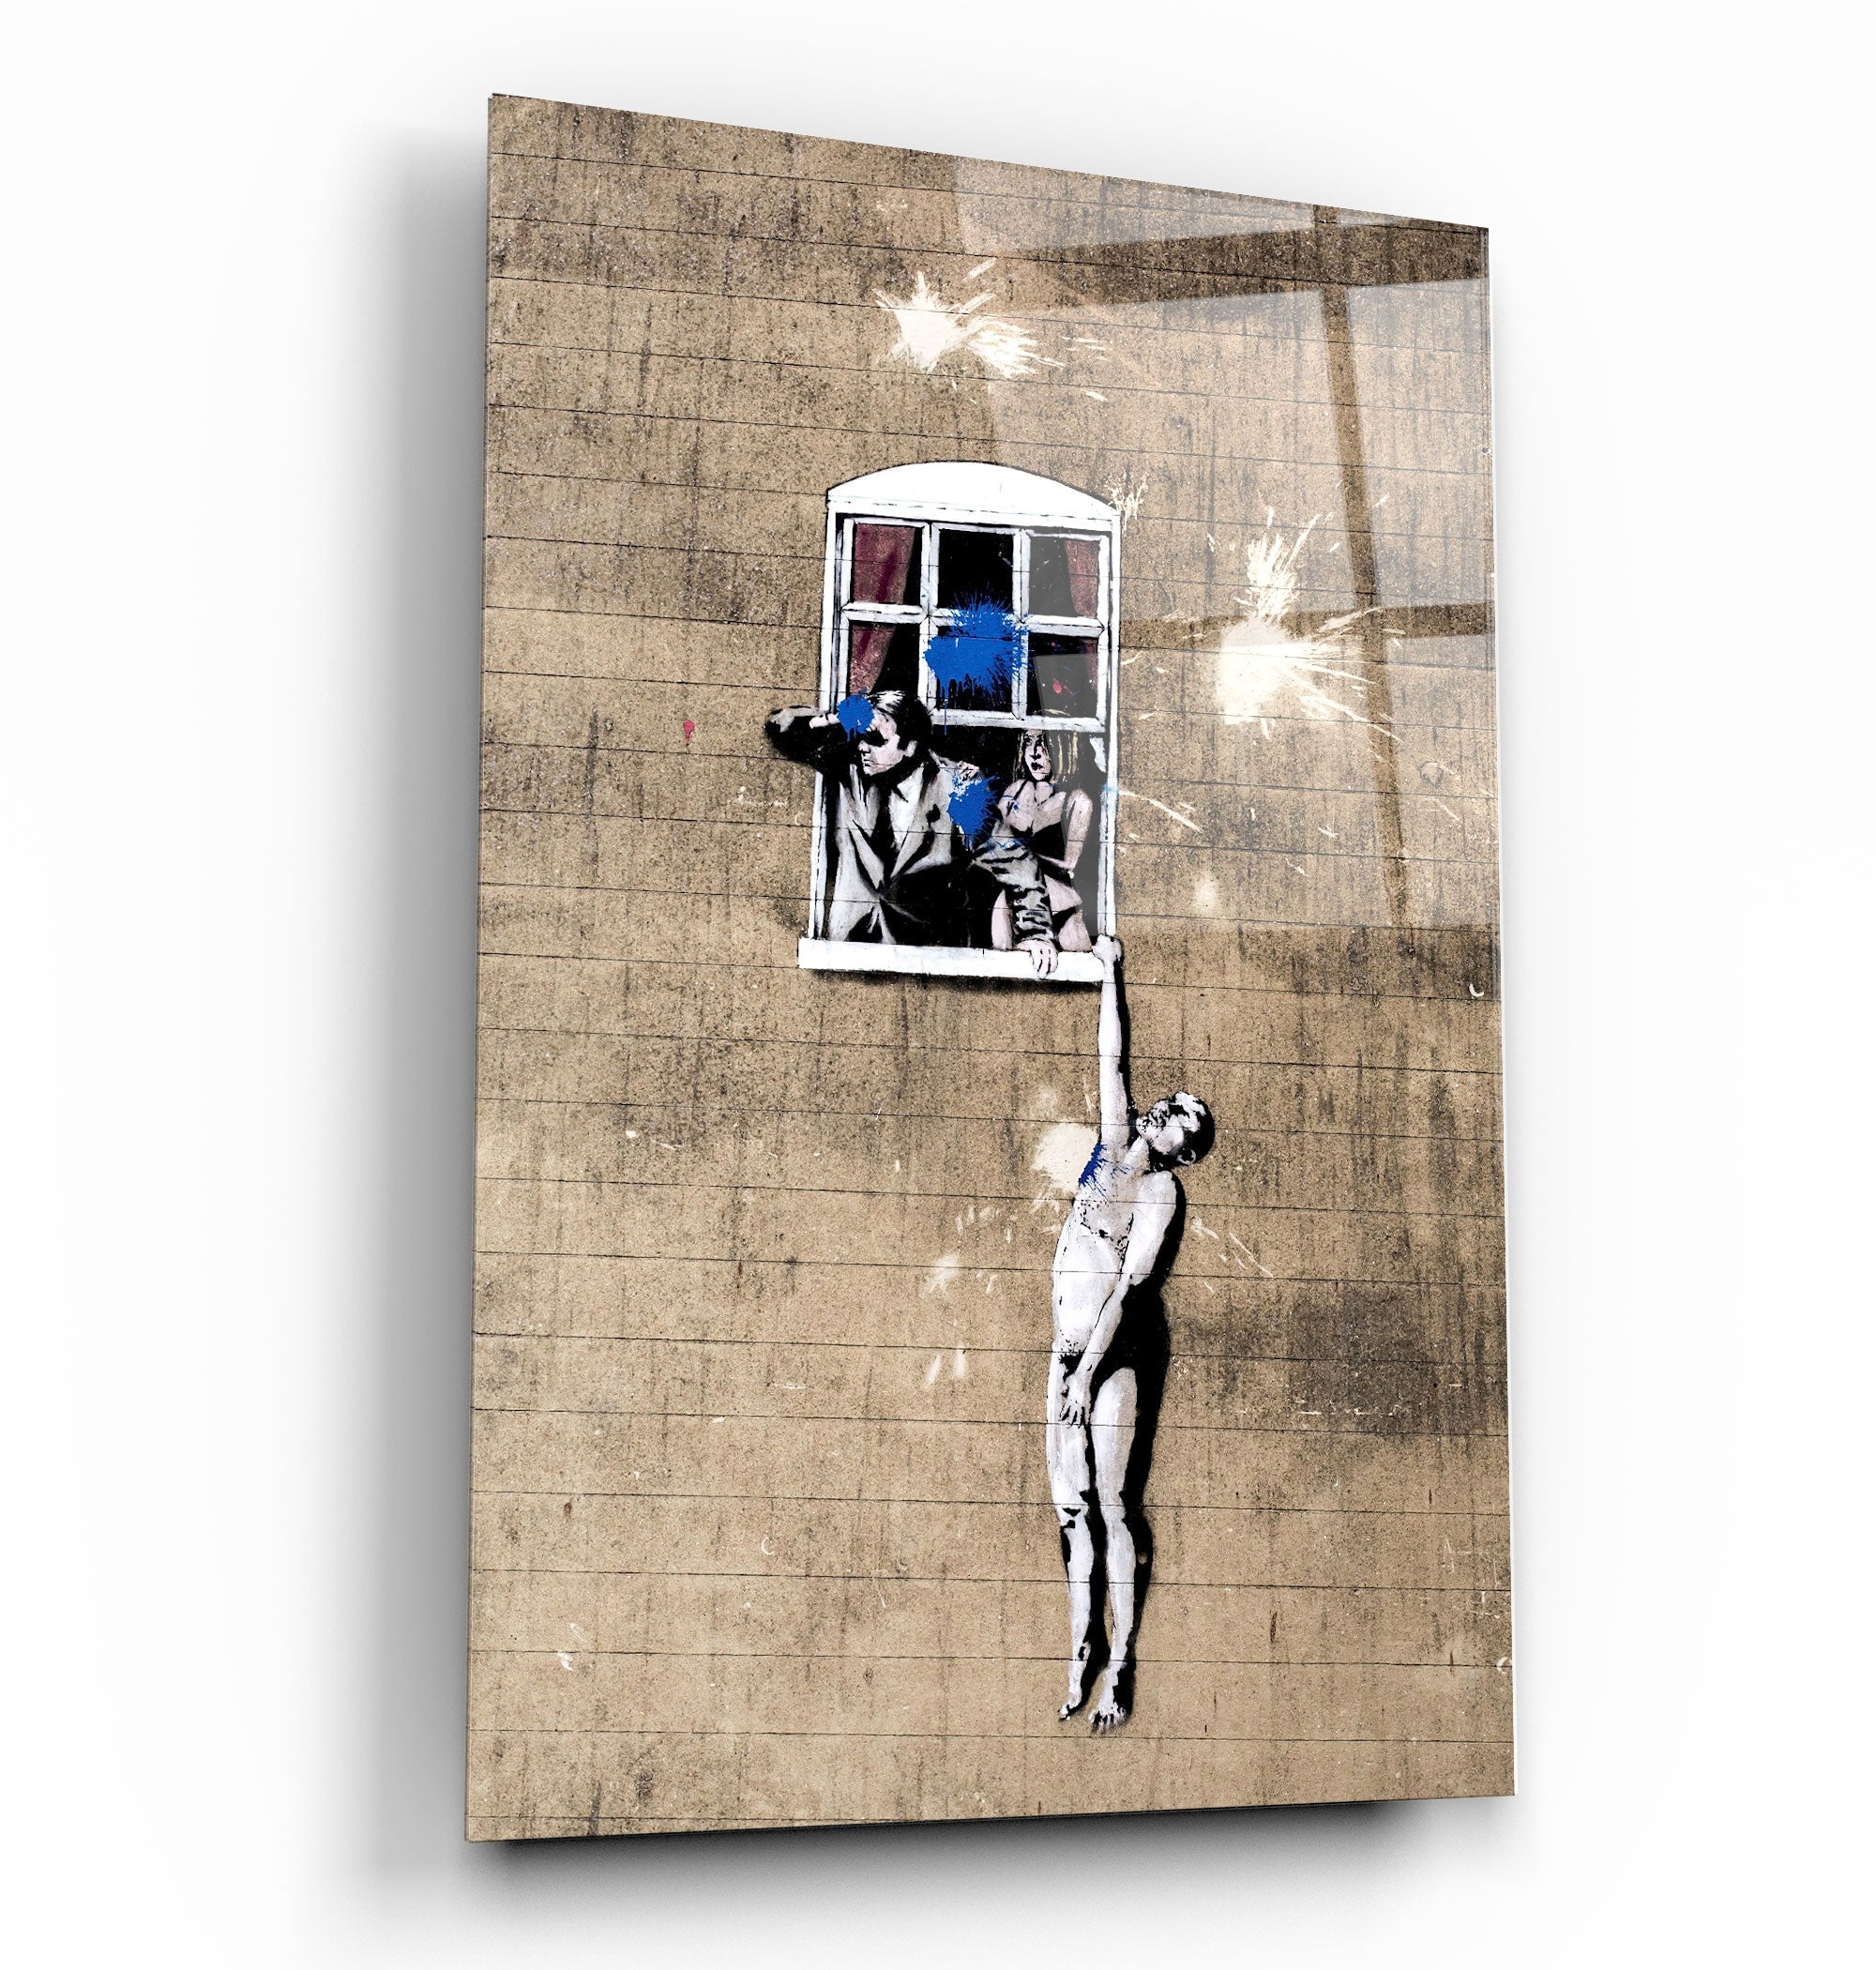 ・"Banksy - Man hanging from a window"・Glass Wall Art